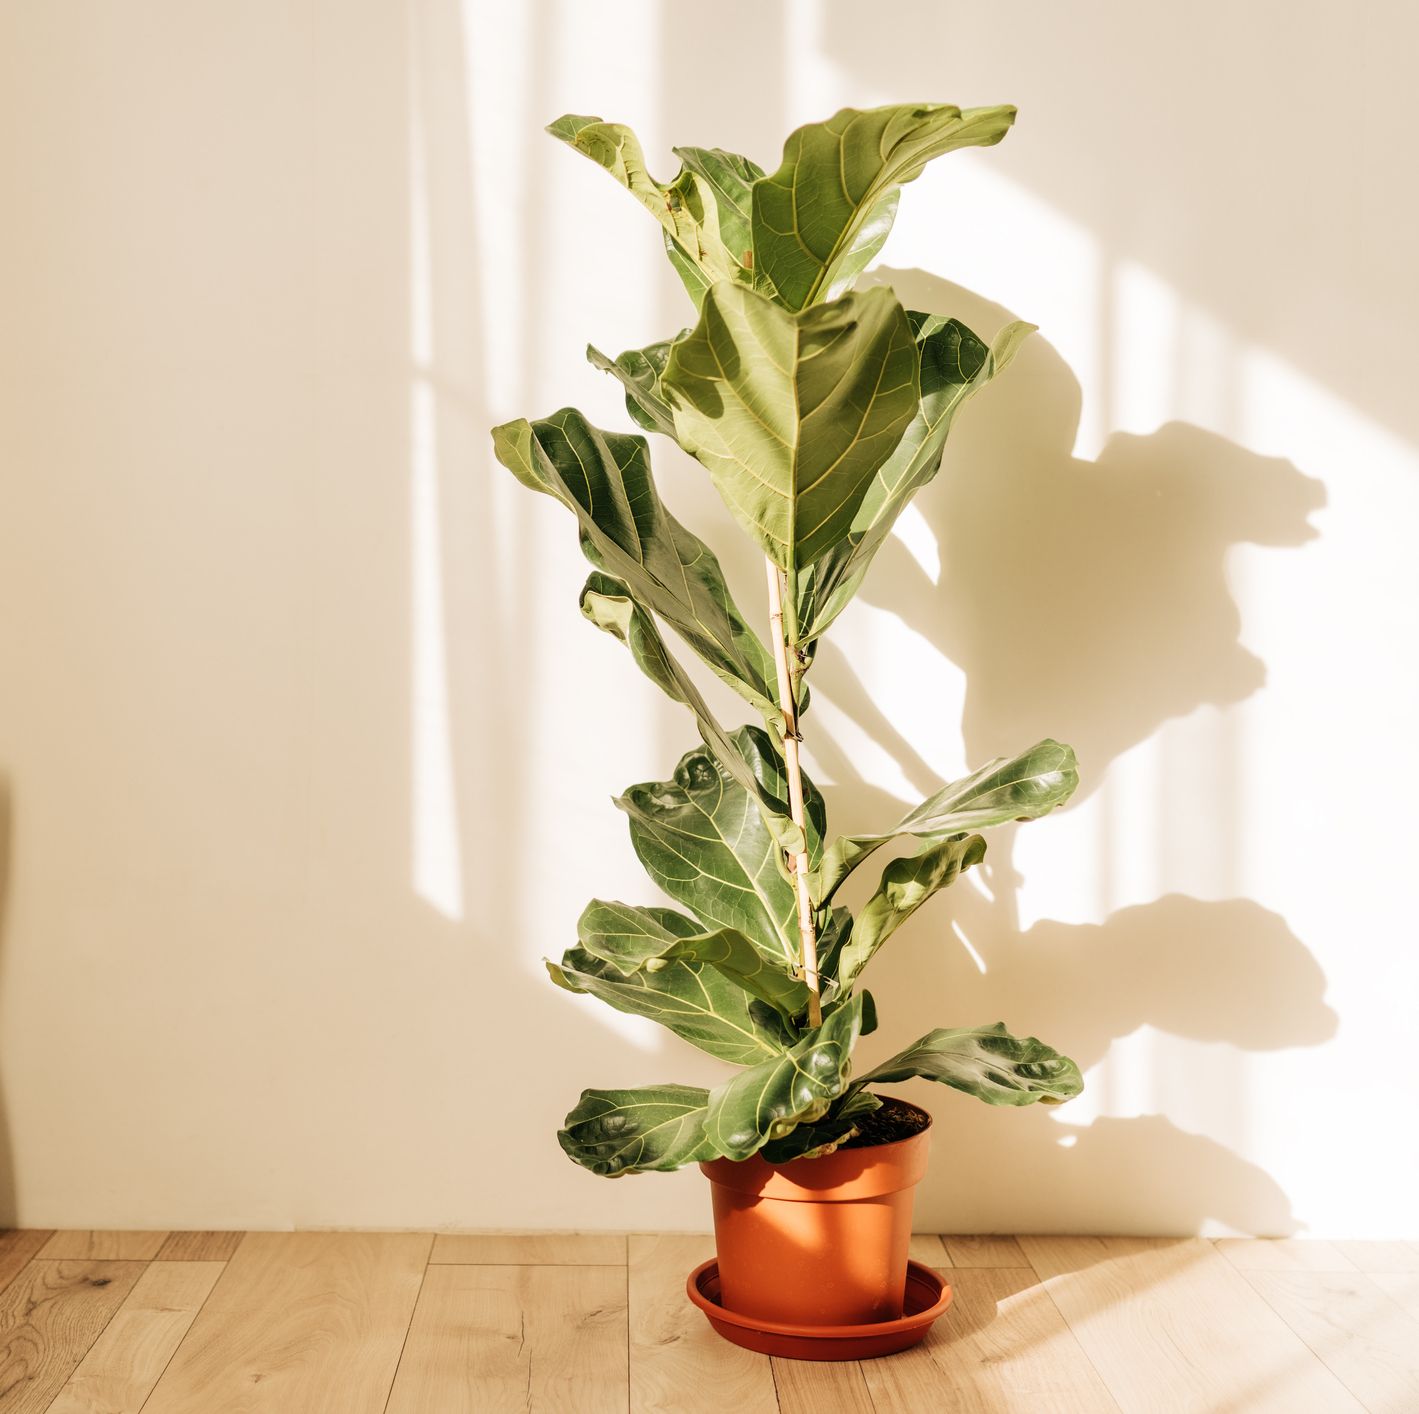 Get a Fully Grown Fiddle Leaf Fig Tree From Amazon's Plant Sale for Only $39